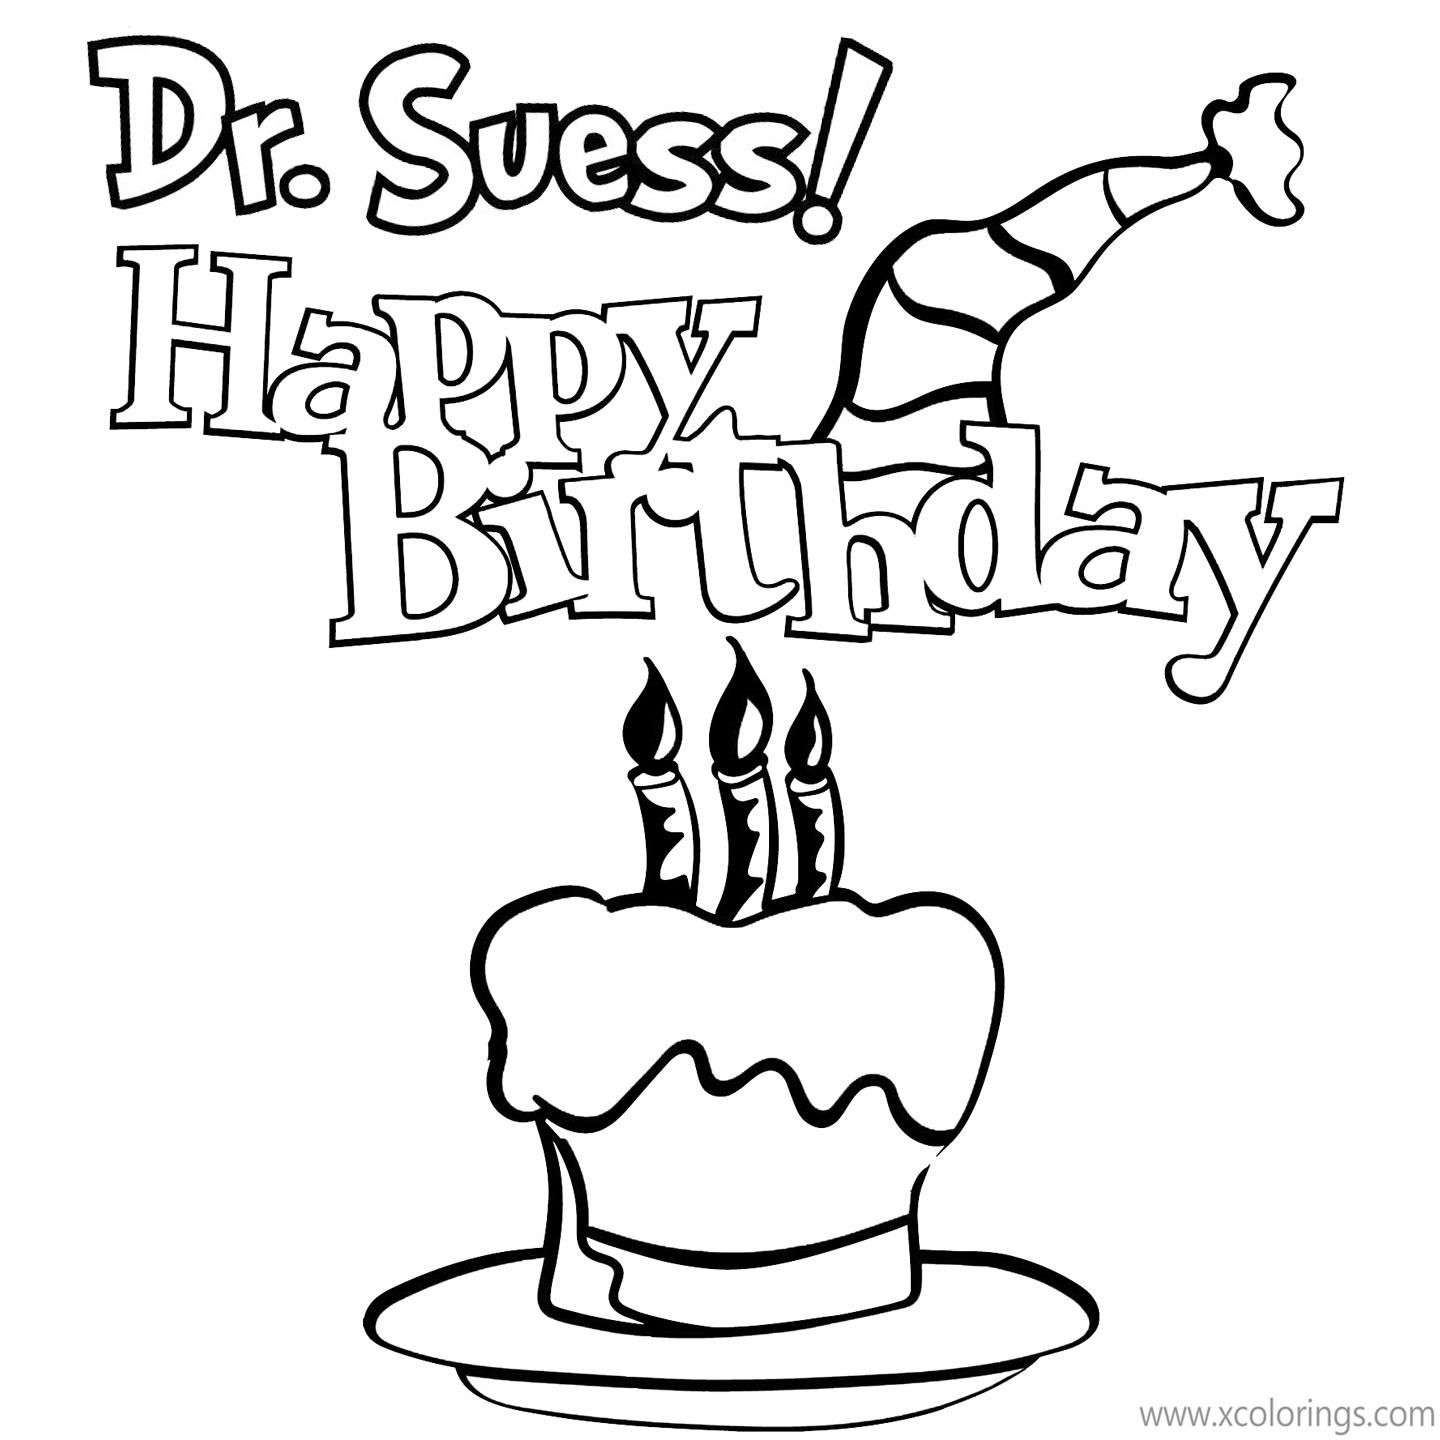 Free Happy Birthday Dr Seuss Coloring Pages Hat and Cake printable